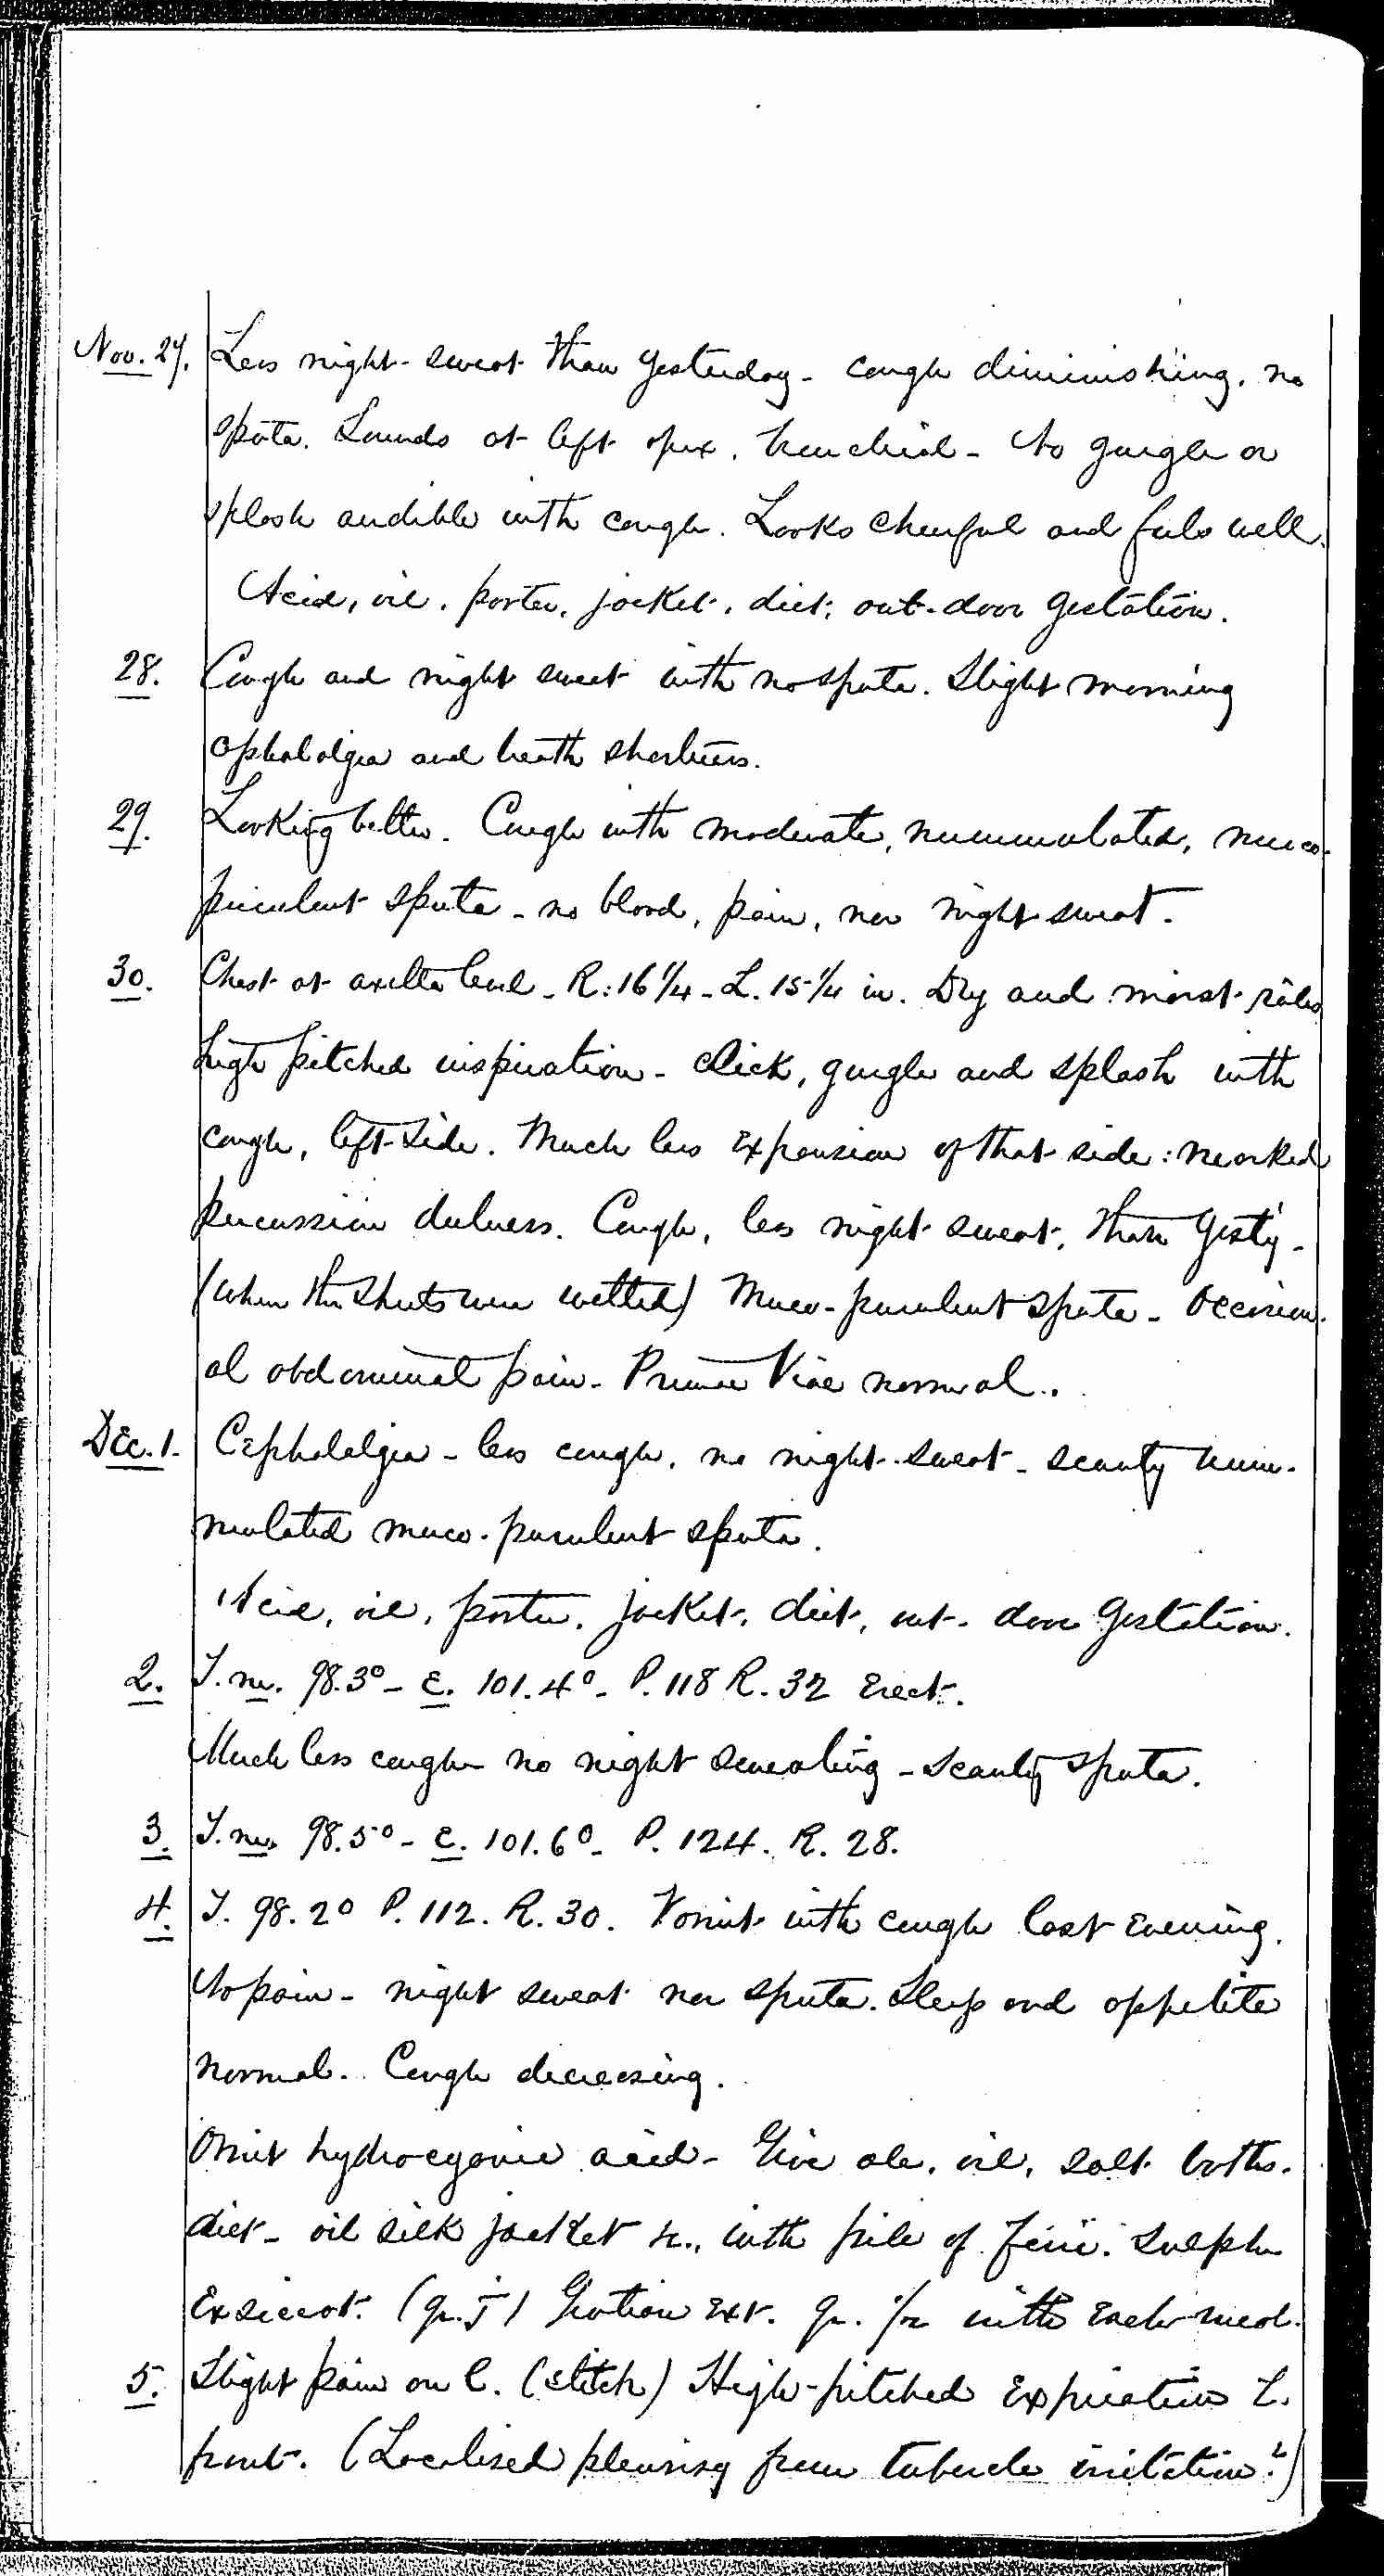 Entry for Richard Forn (page 8 of 21) in the log Hospital Tickets and Case Papers - Naval Hospital - Washington, D.C. - 1868-69